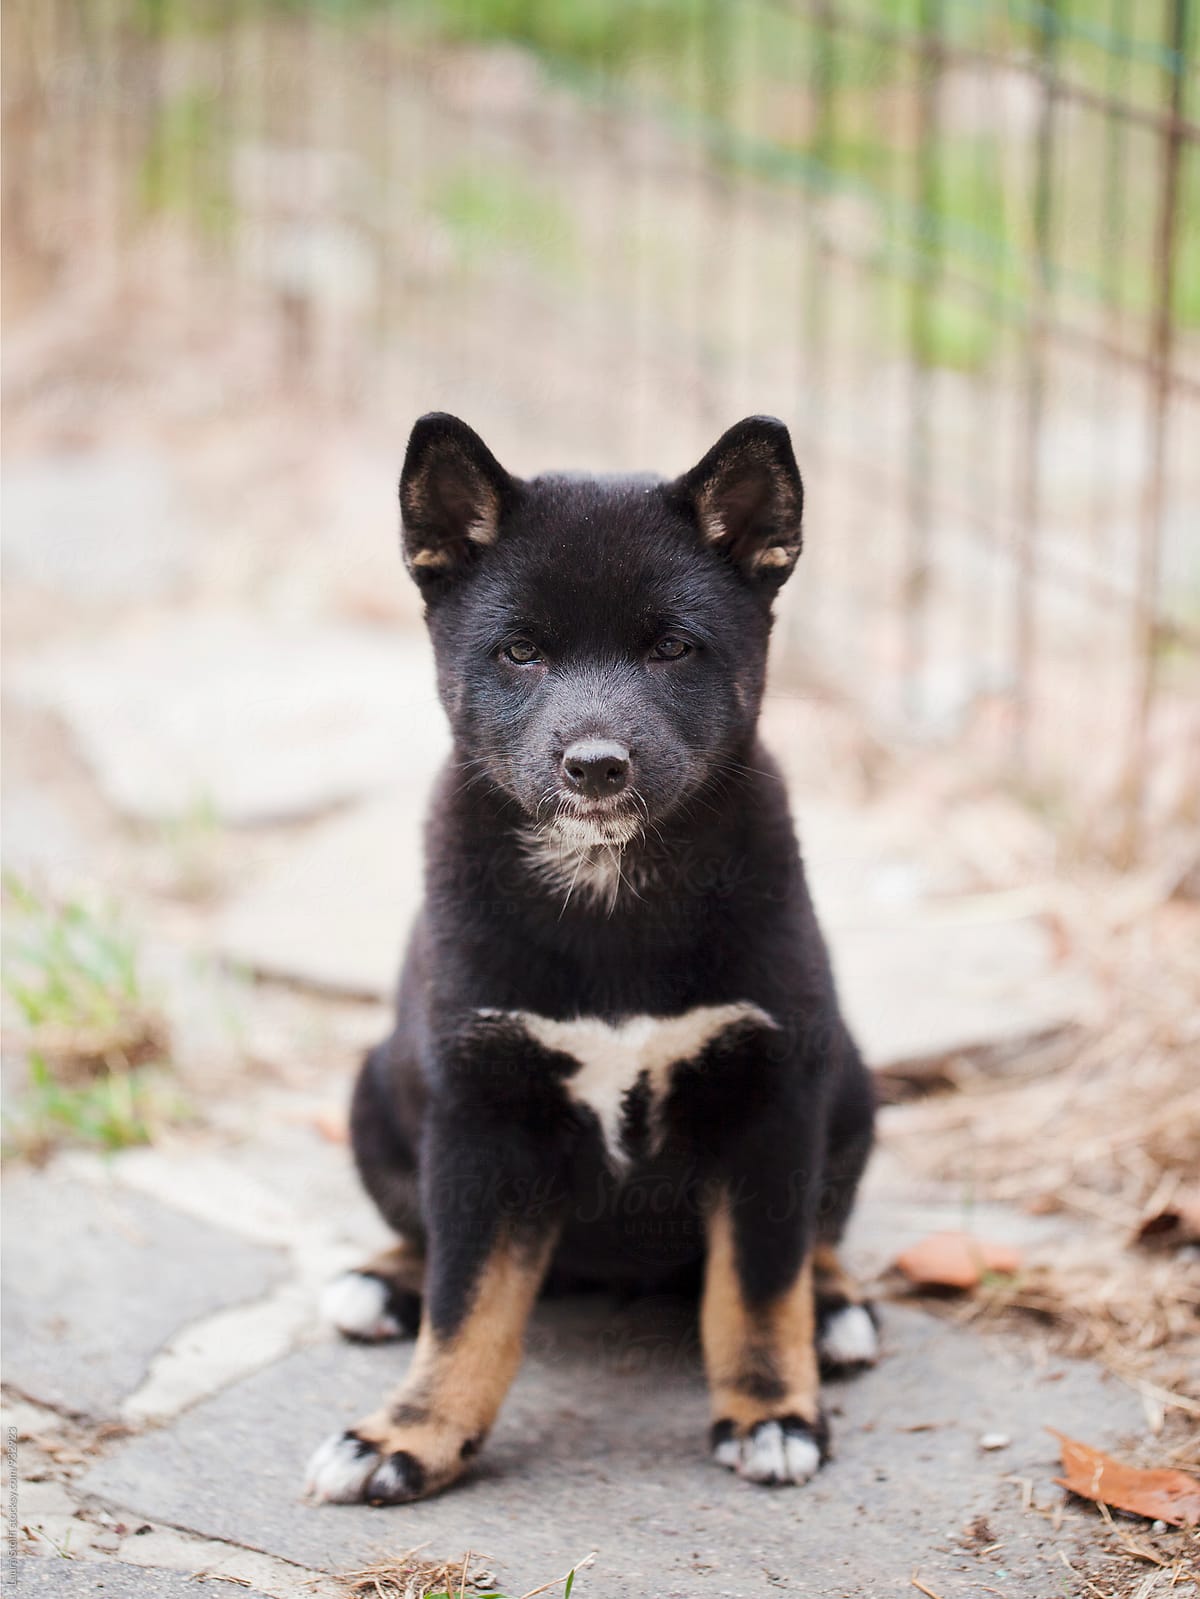 Adorable Shiba Inu puppy sits in garden and looks straight at the camera